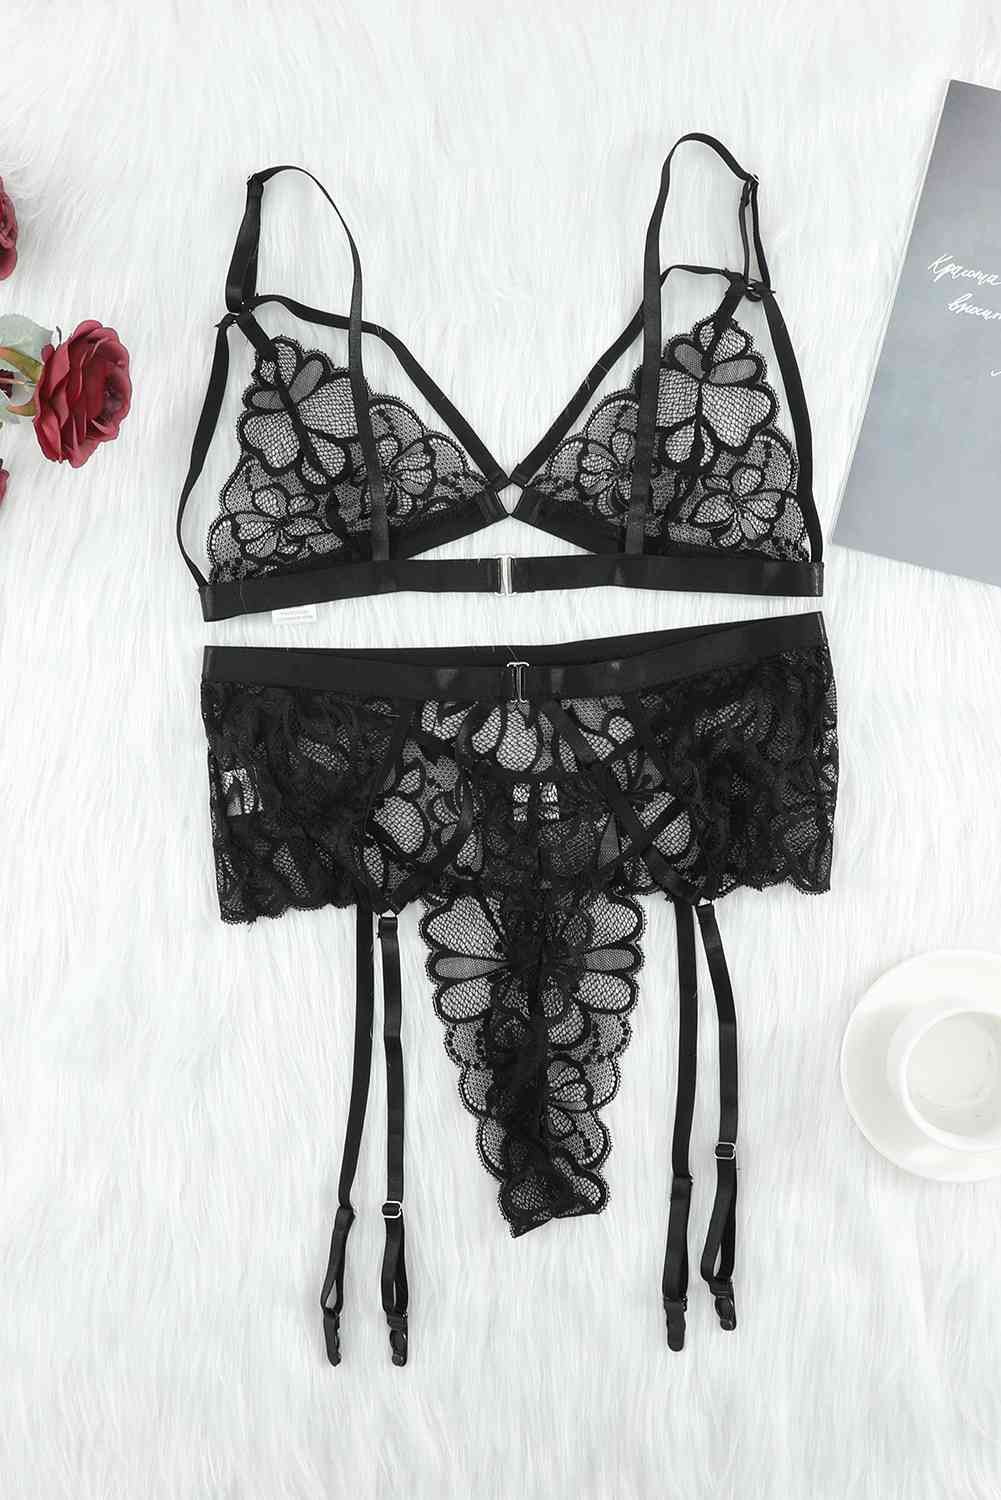 Strappy Three-Piece Lace Lingerie Set - Sufyaa